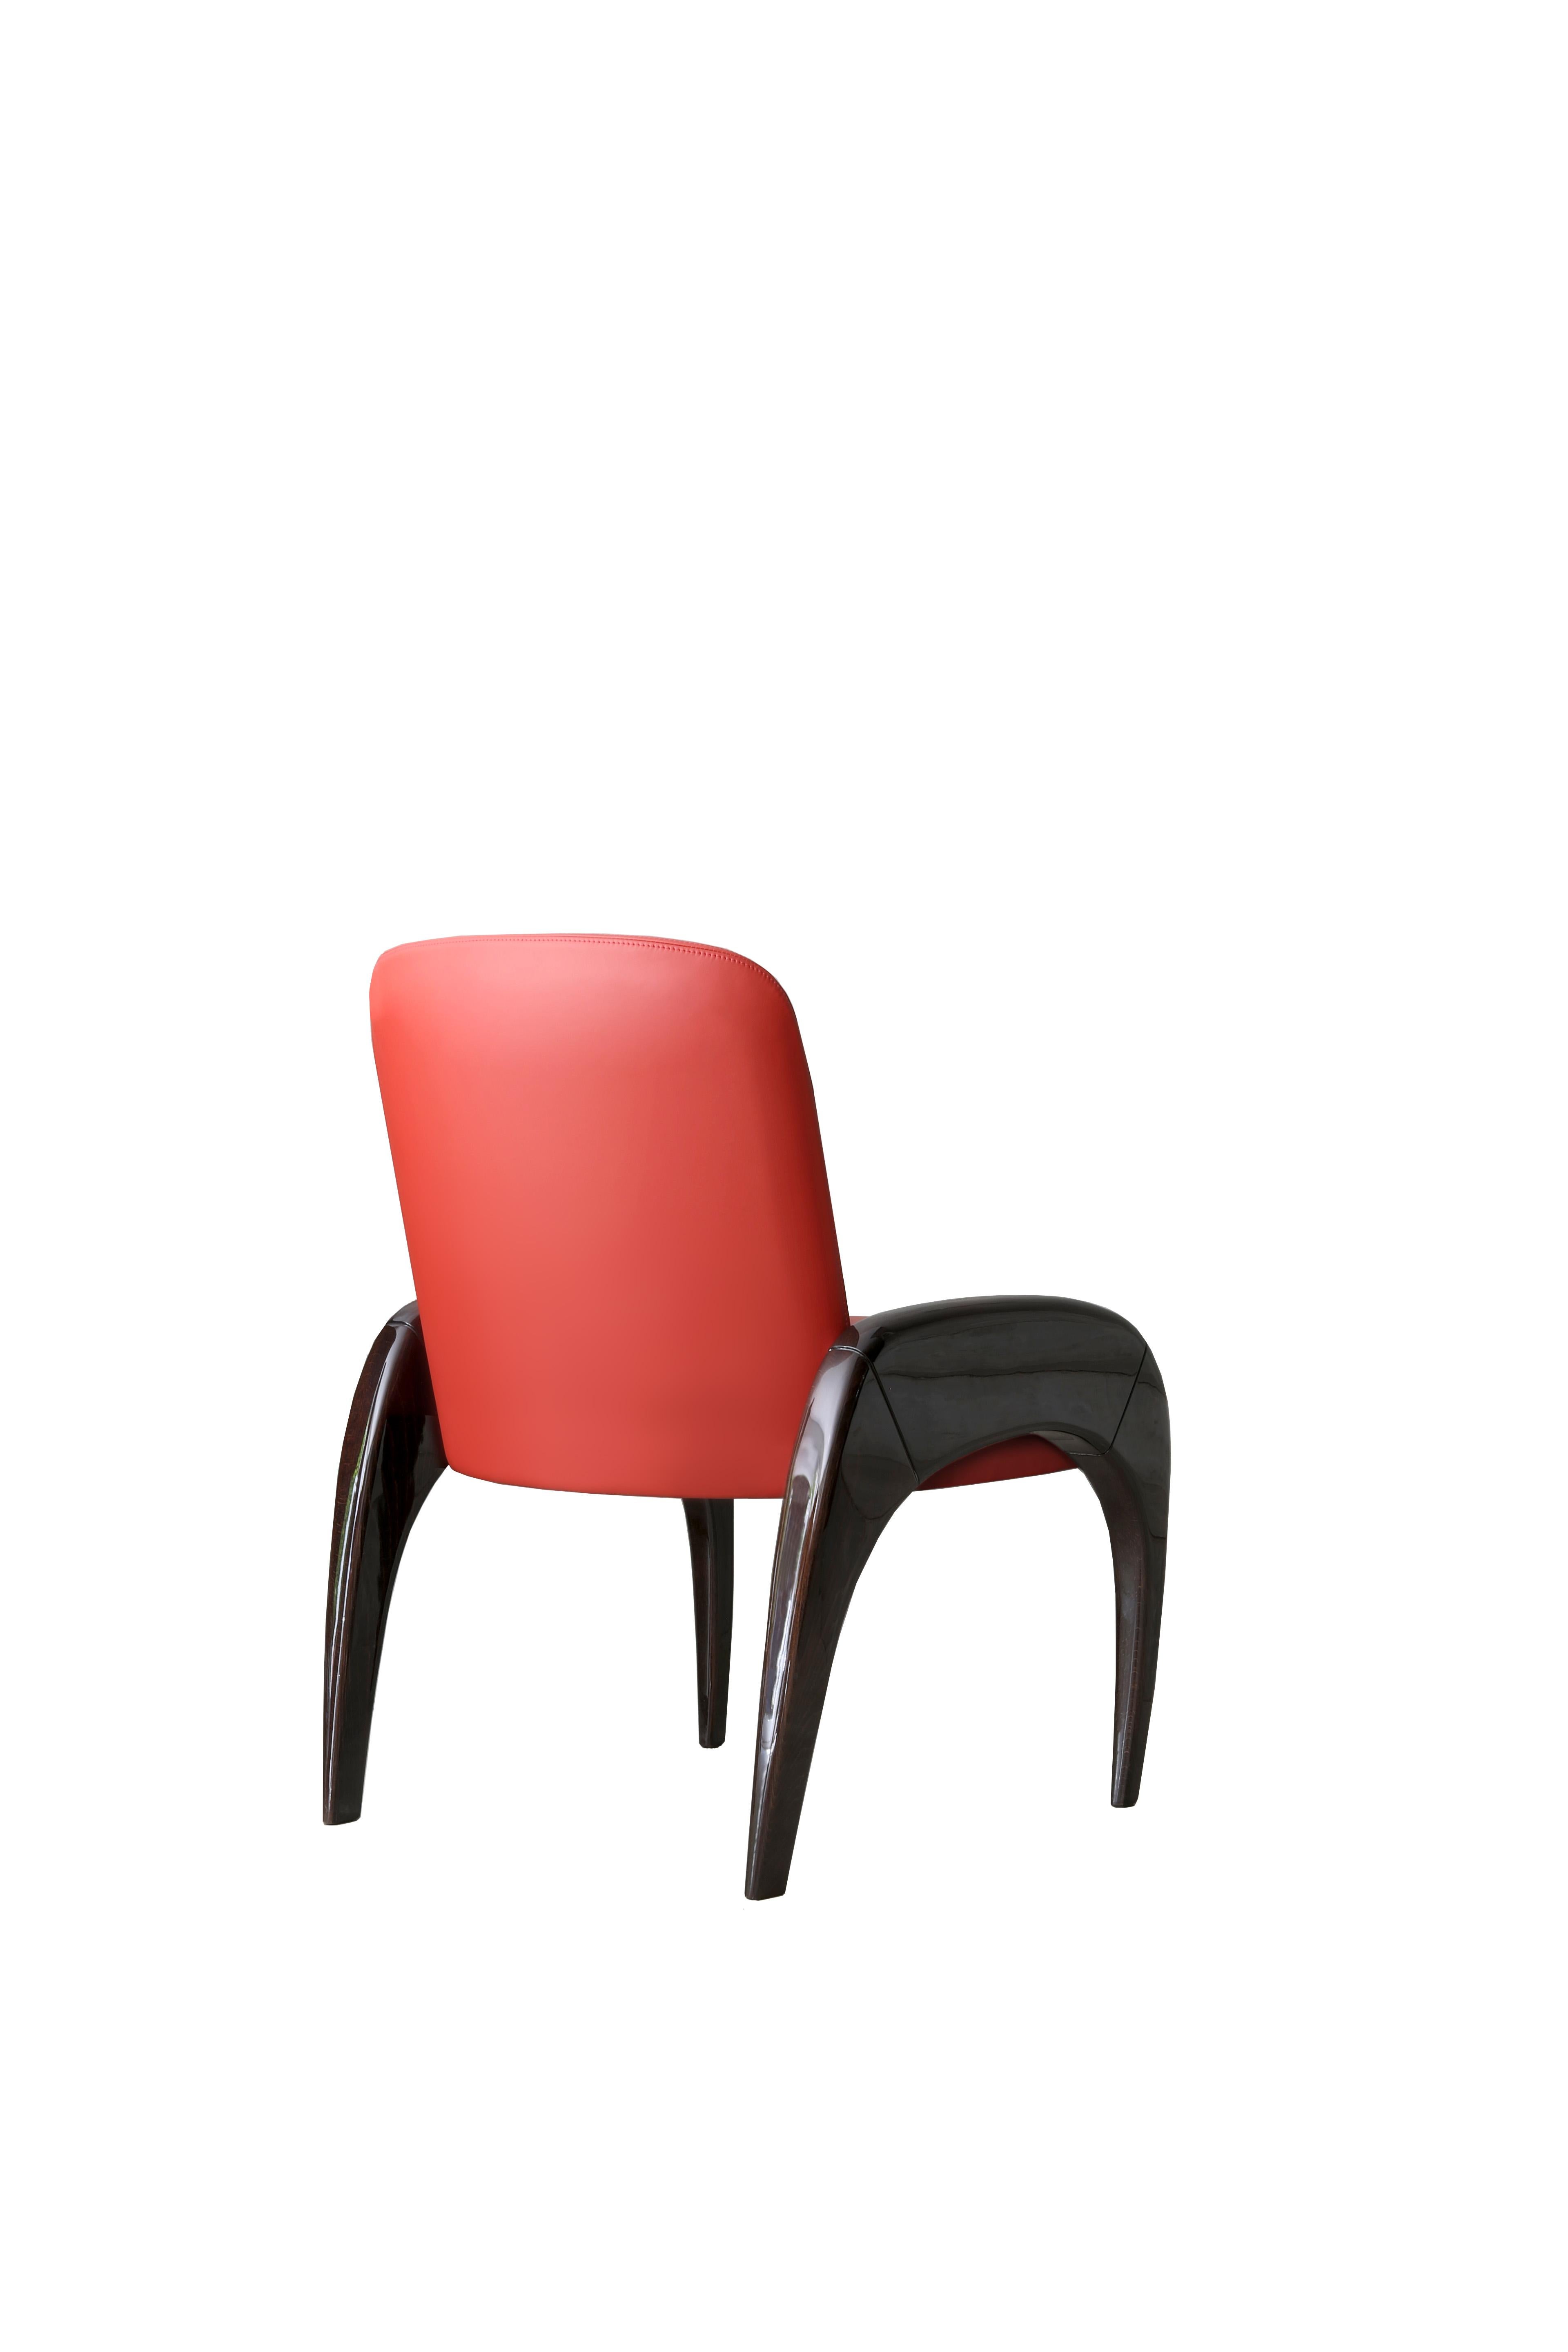 Four legs or two pairs of horns? Both things. The NUBA chair already recalls the spirit of the savannah in its name. Super chic tribal.

NUBA is a dining chair and stool charactherized by the two curving solid wood legs which become unusual